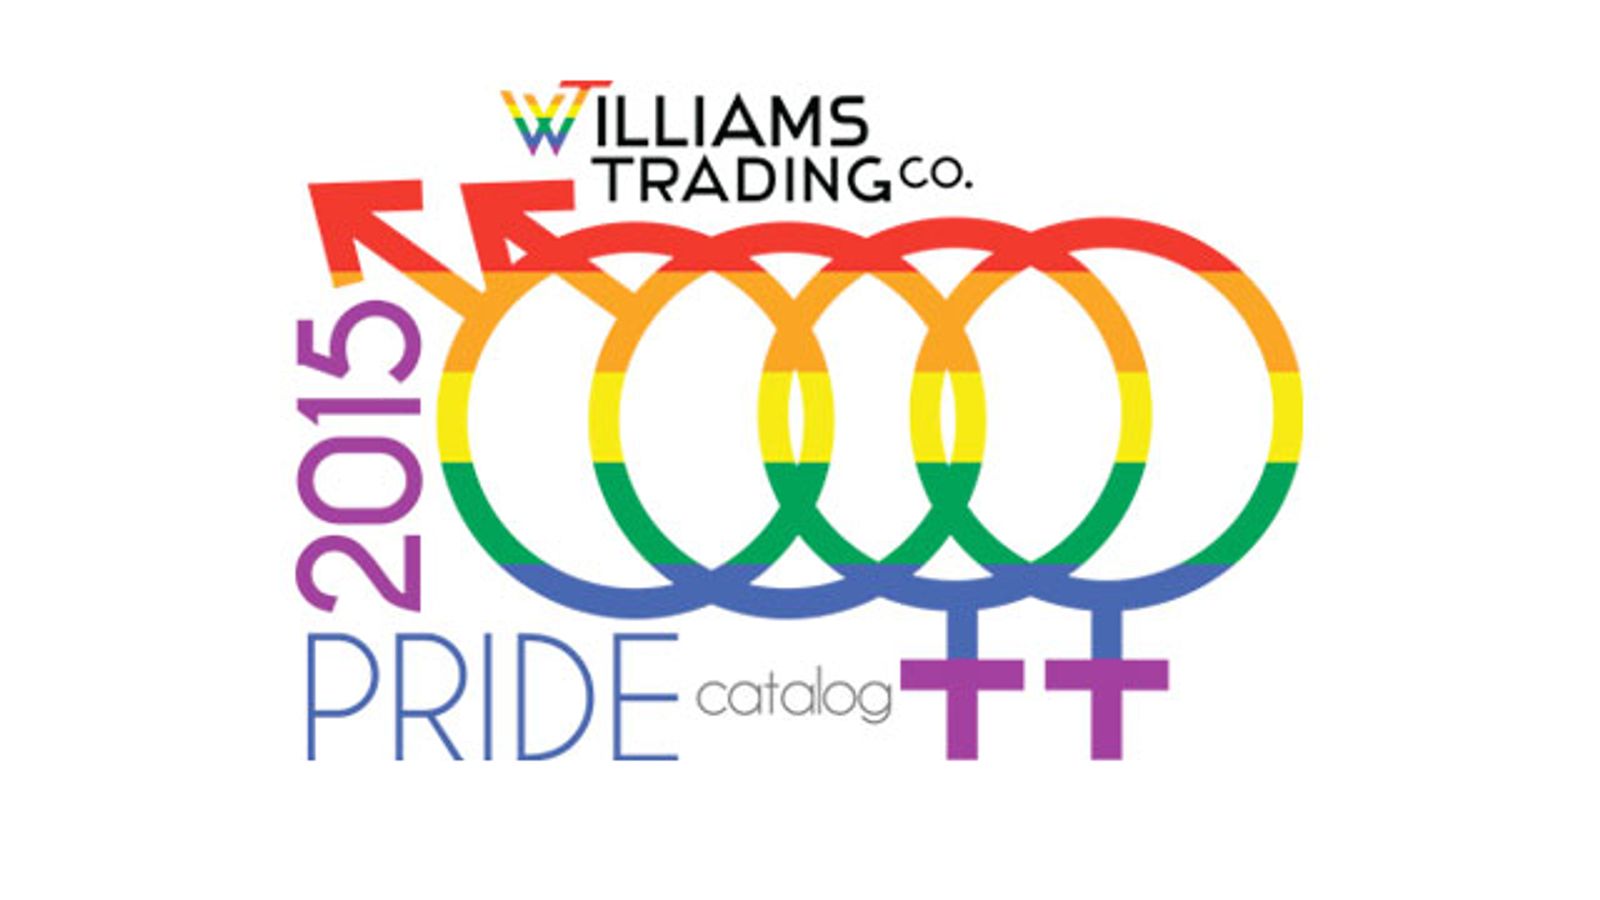 Williams Trading Launches Gay Pride Marketing Campaign